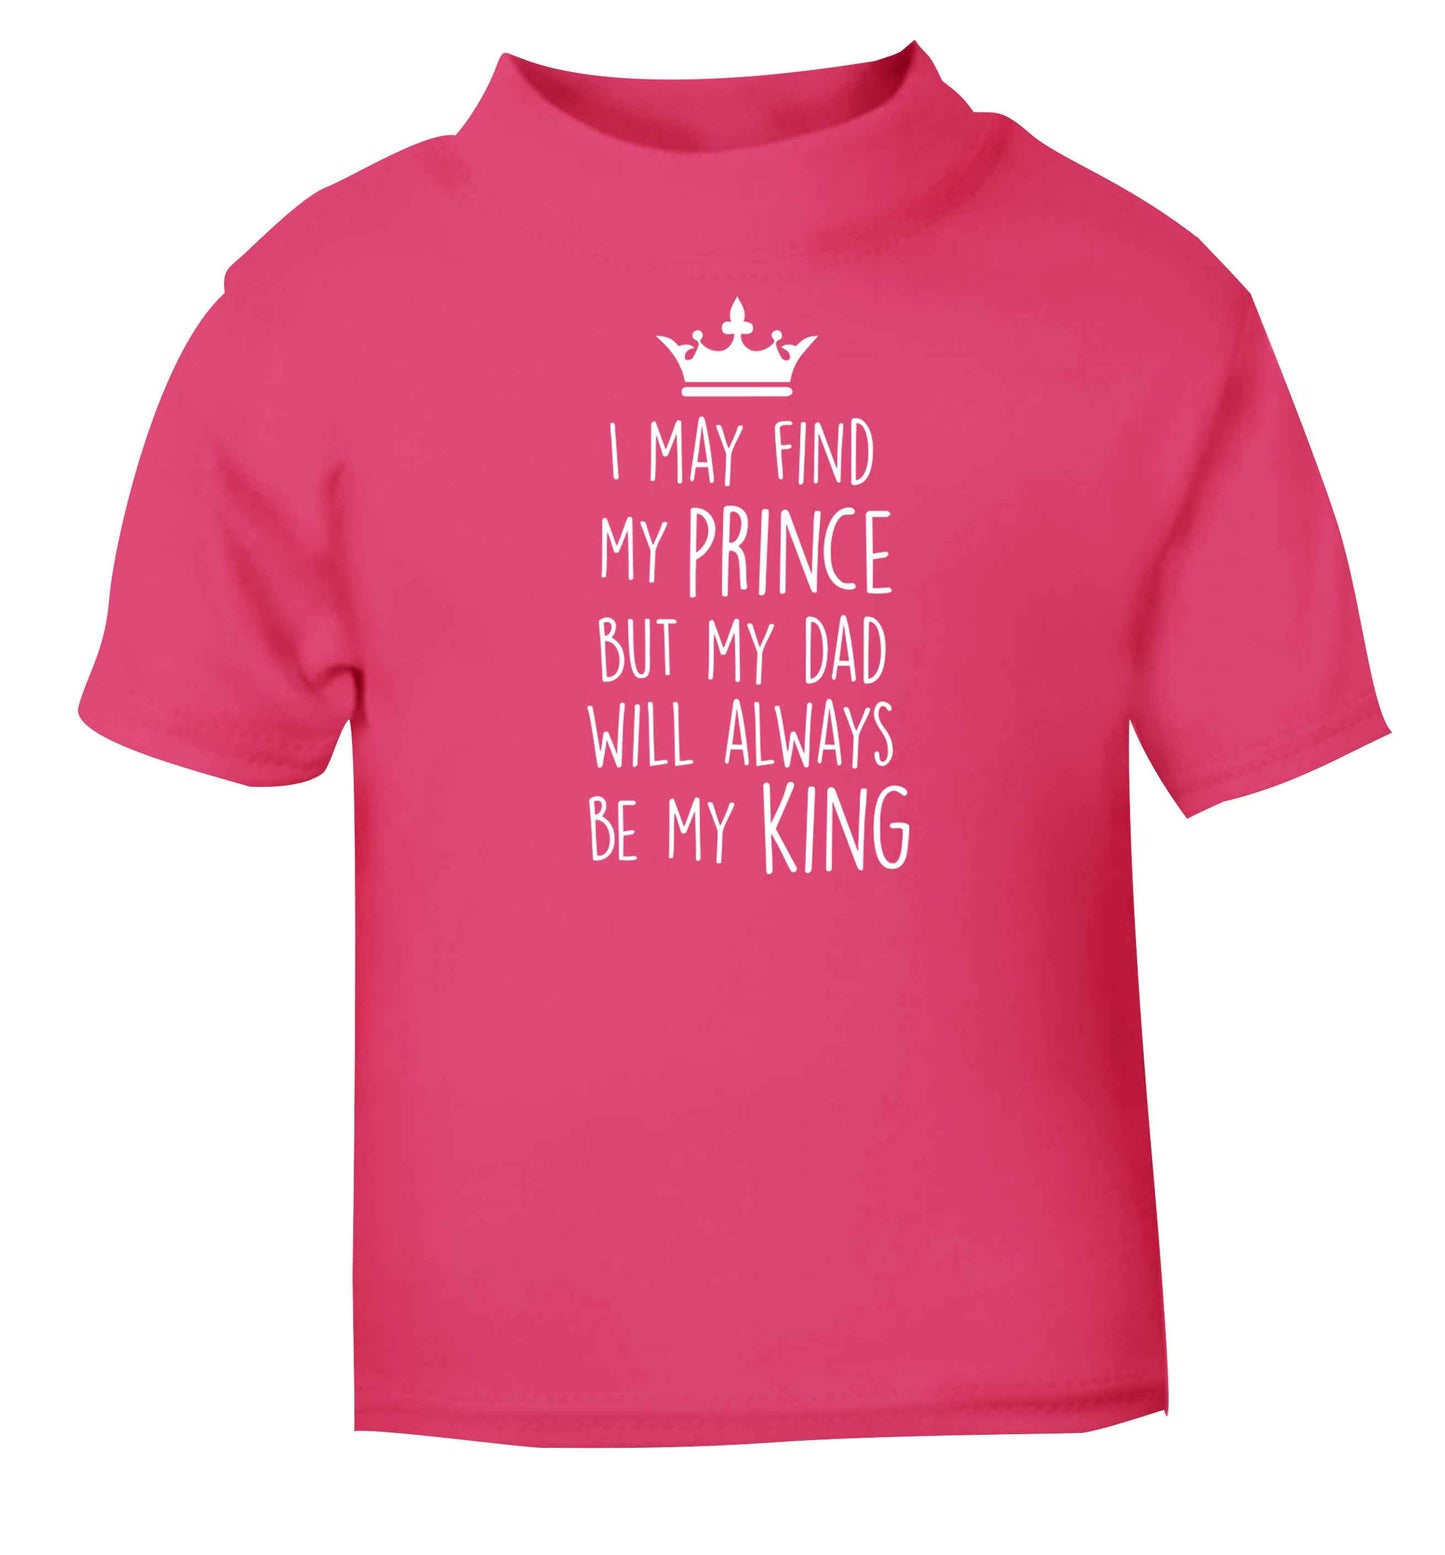 I may find my prince but my dad will always be my king pink baby toddler Tshirt 2 Years